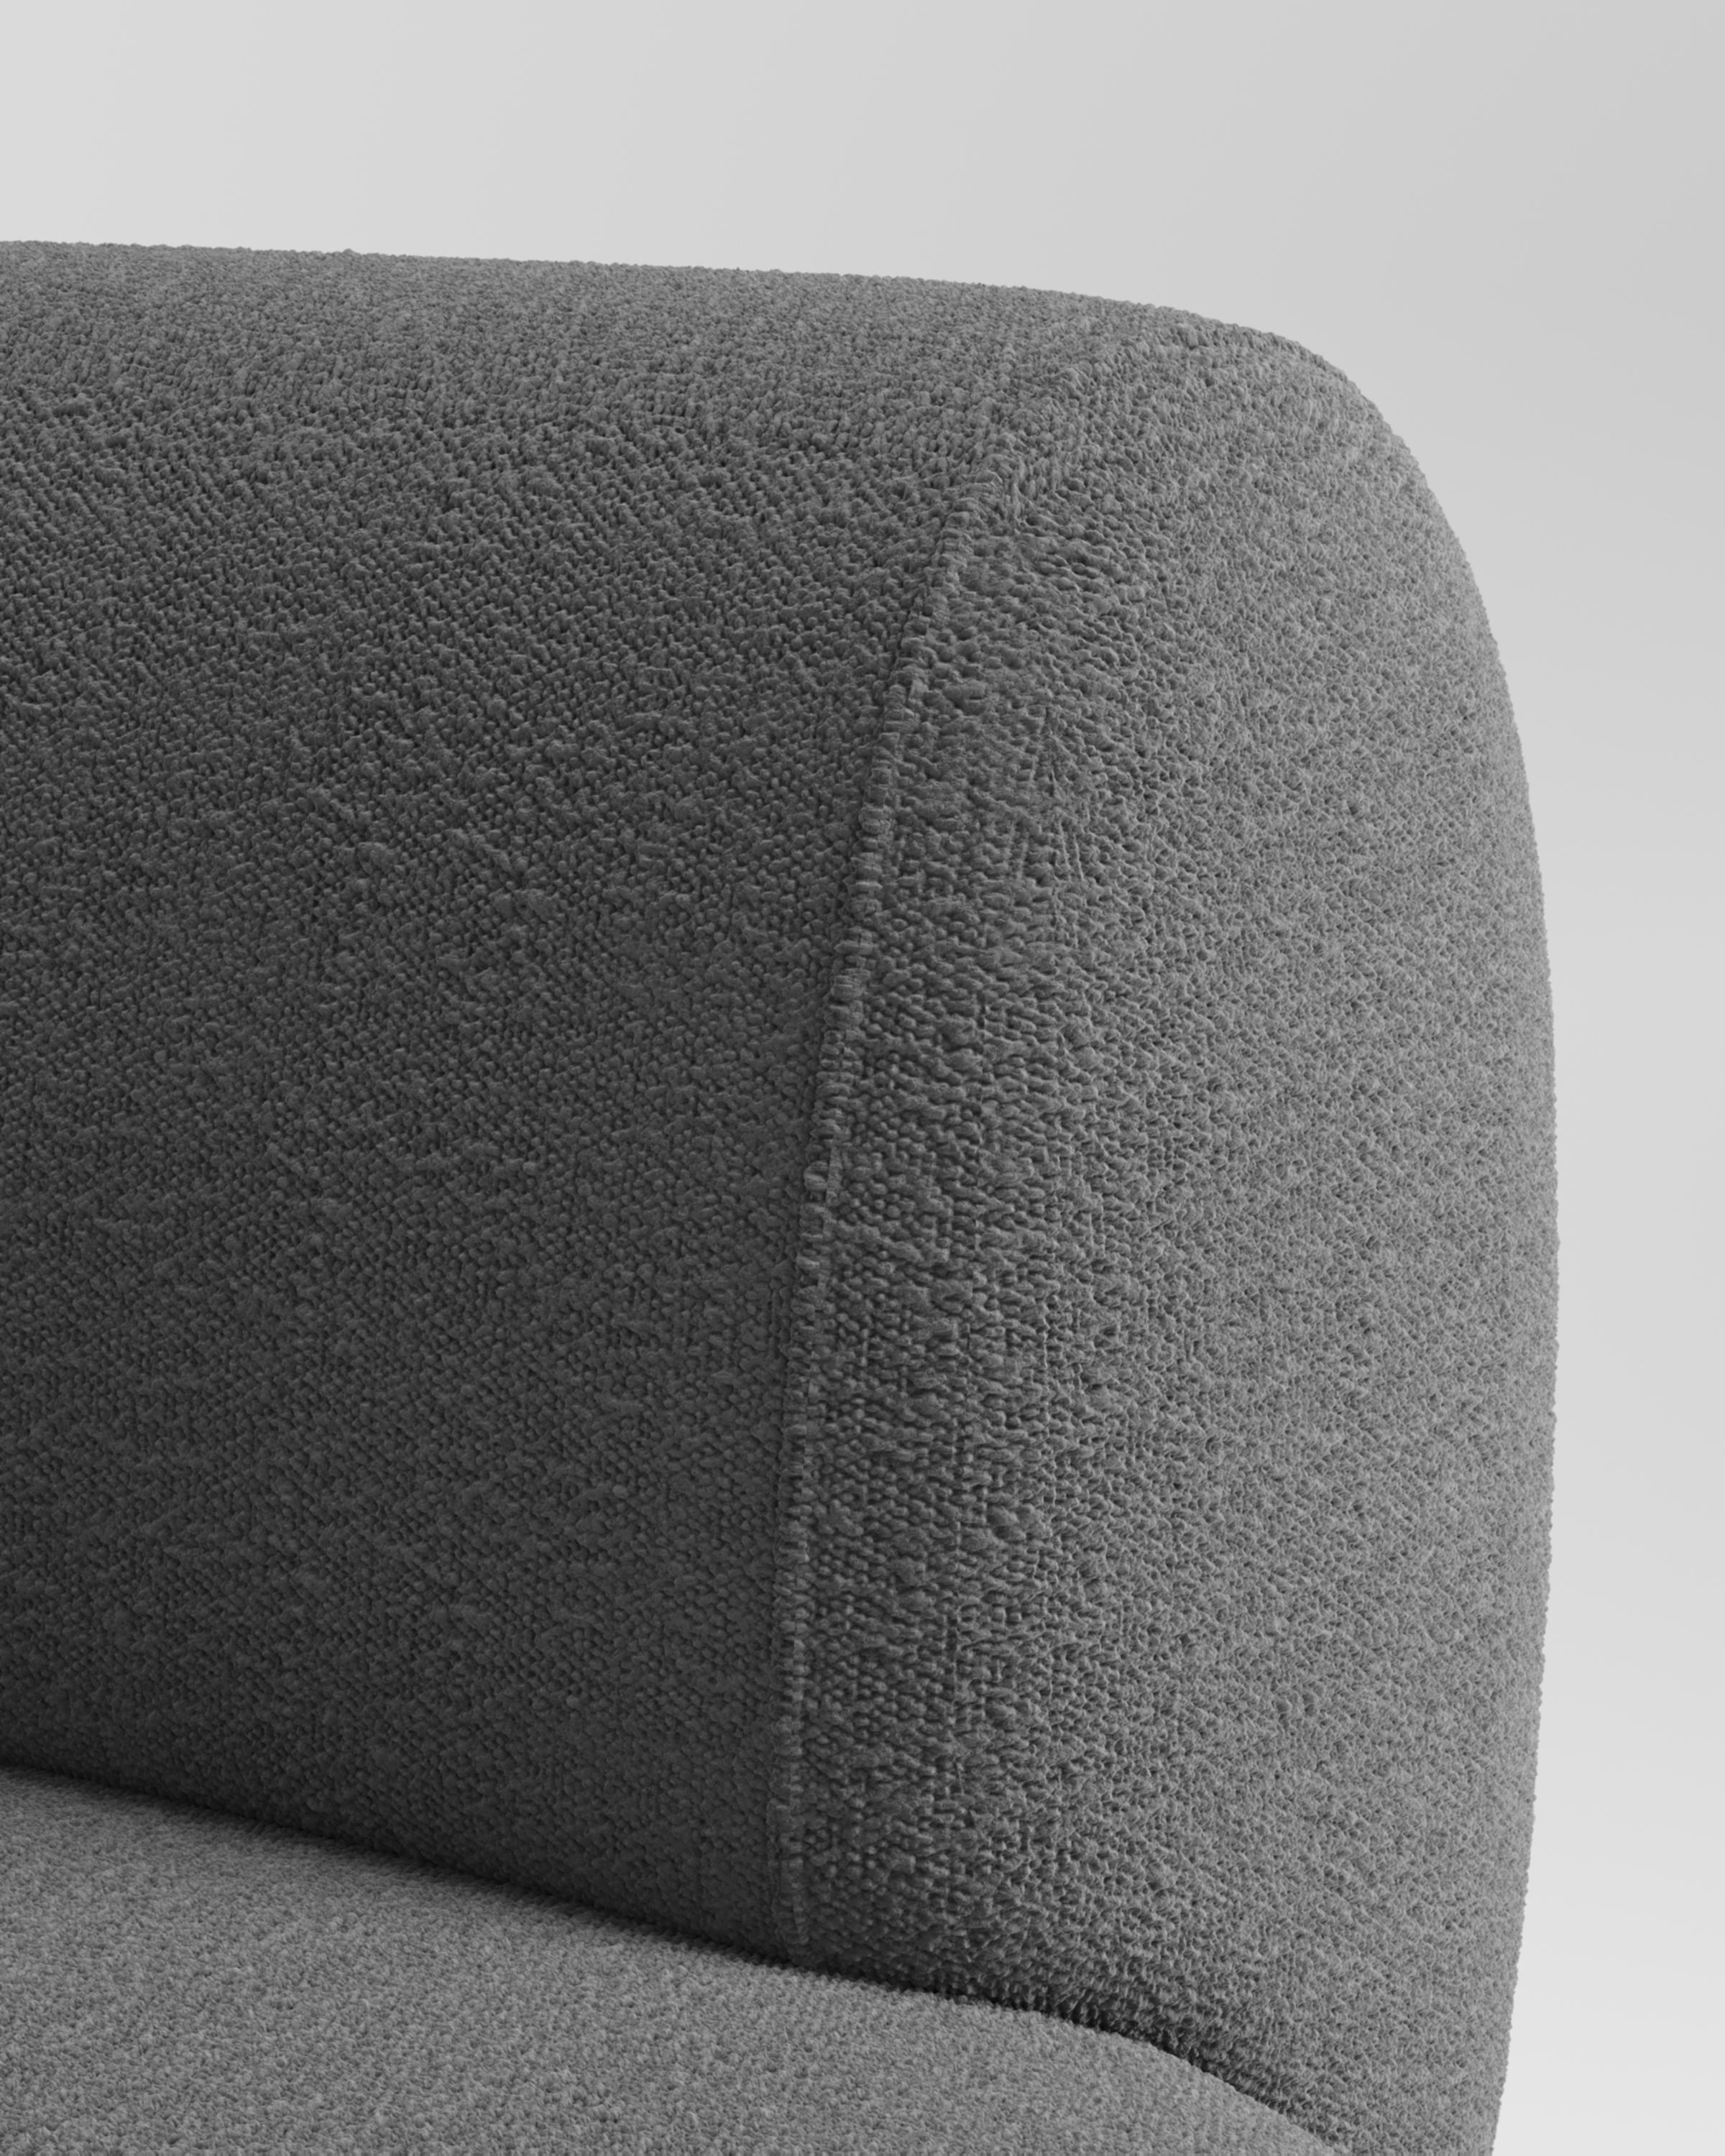 Collector Hug Sofa Designed by Ferrianisbolgi Fabric Bouclé Charcoal In New Condition For Sale In Castelo da Maia, PT